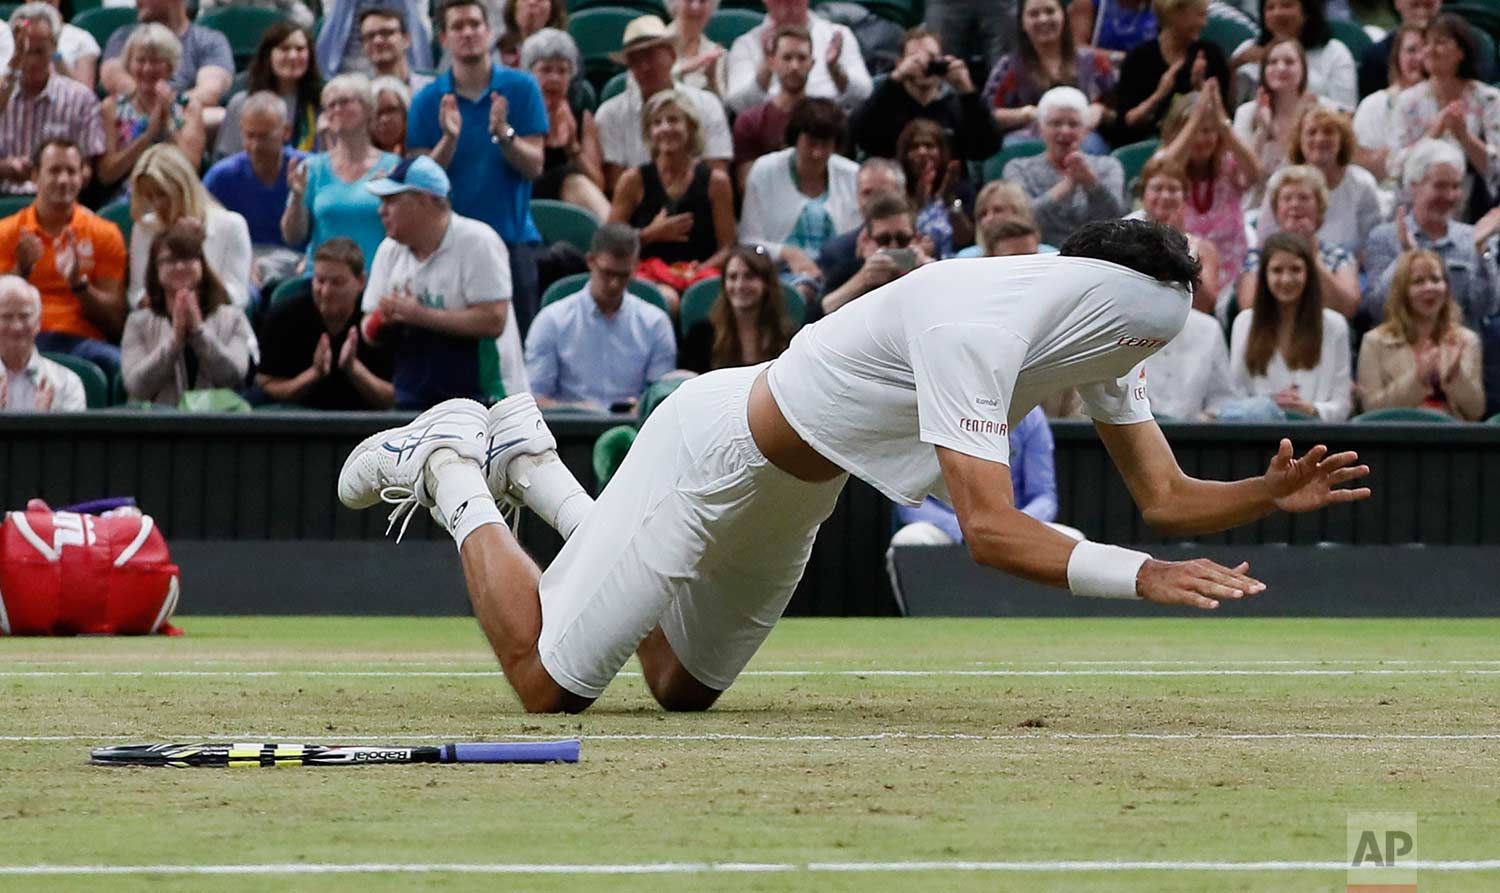  In this Saturday, July 15, 2017 photo, Brazil's Marcelo Melo falls to the ground with his shirt covering his face as he celebrates after he and his playing partner Poland's Lukasz Kubot, defeated Austria's Oliver Marach, and Croatia's Mate Pavic in 